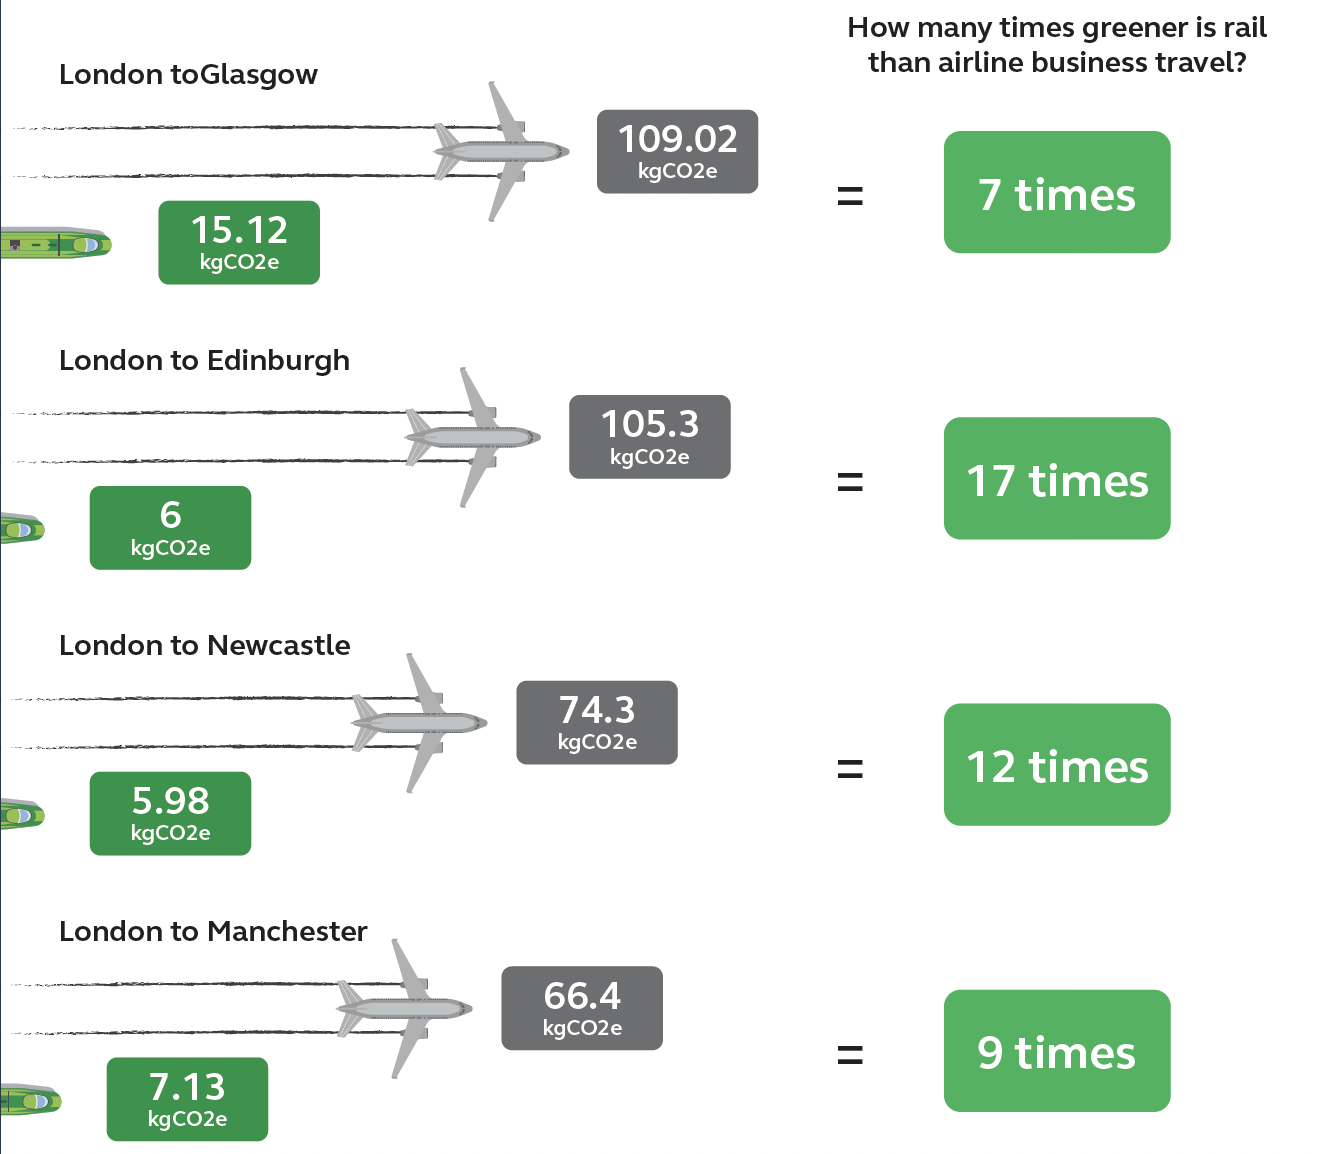 Graphic showing carbon emission comparisons on 4 routes. London to Glasgow 7 times greener by train compared to plane, London to Edinburgh 17 times greener by train compared to plane, London to Newcastle 12 times greener to travel by train compared to plane, London to Manchester 9 times greener to travel by train compared to plane